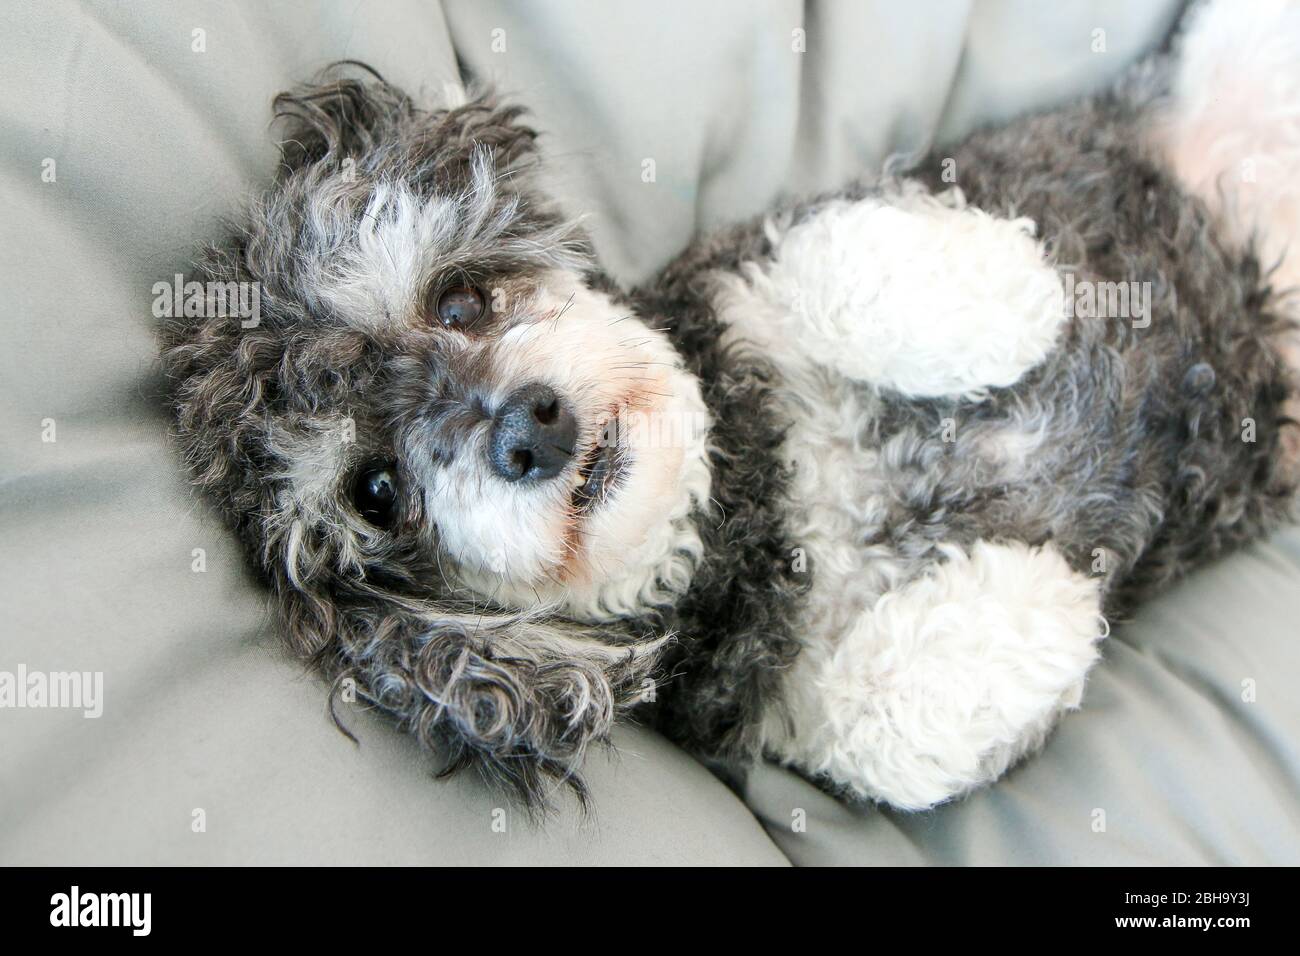 The elderly croosbreed of the poodle and shi tzu is lying in the bed on the duvet and looking cute and happy. Stock Photo